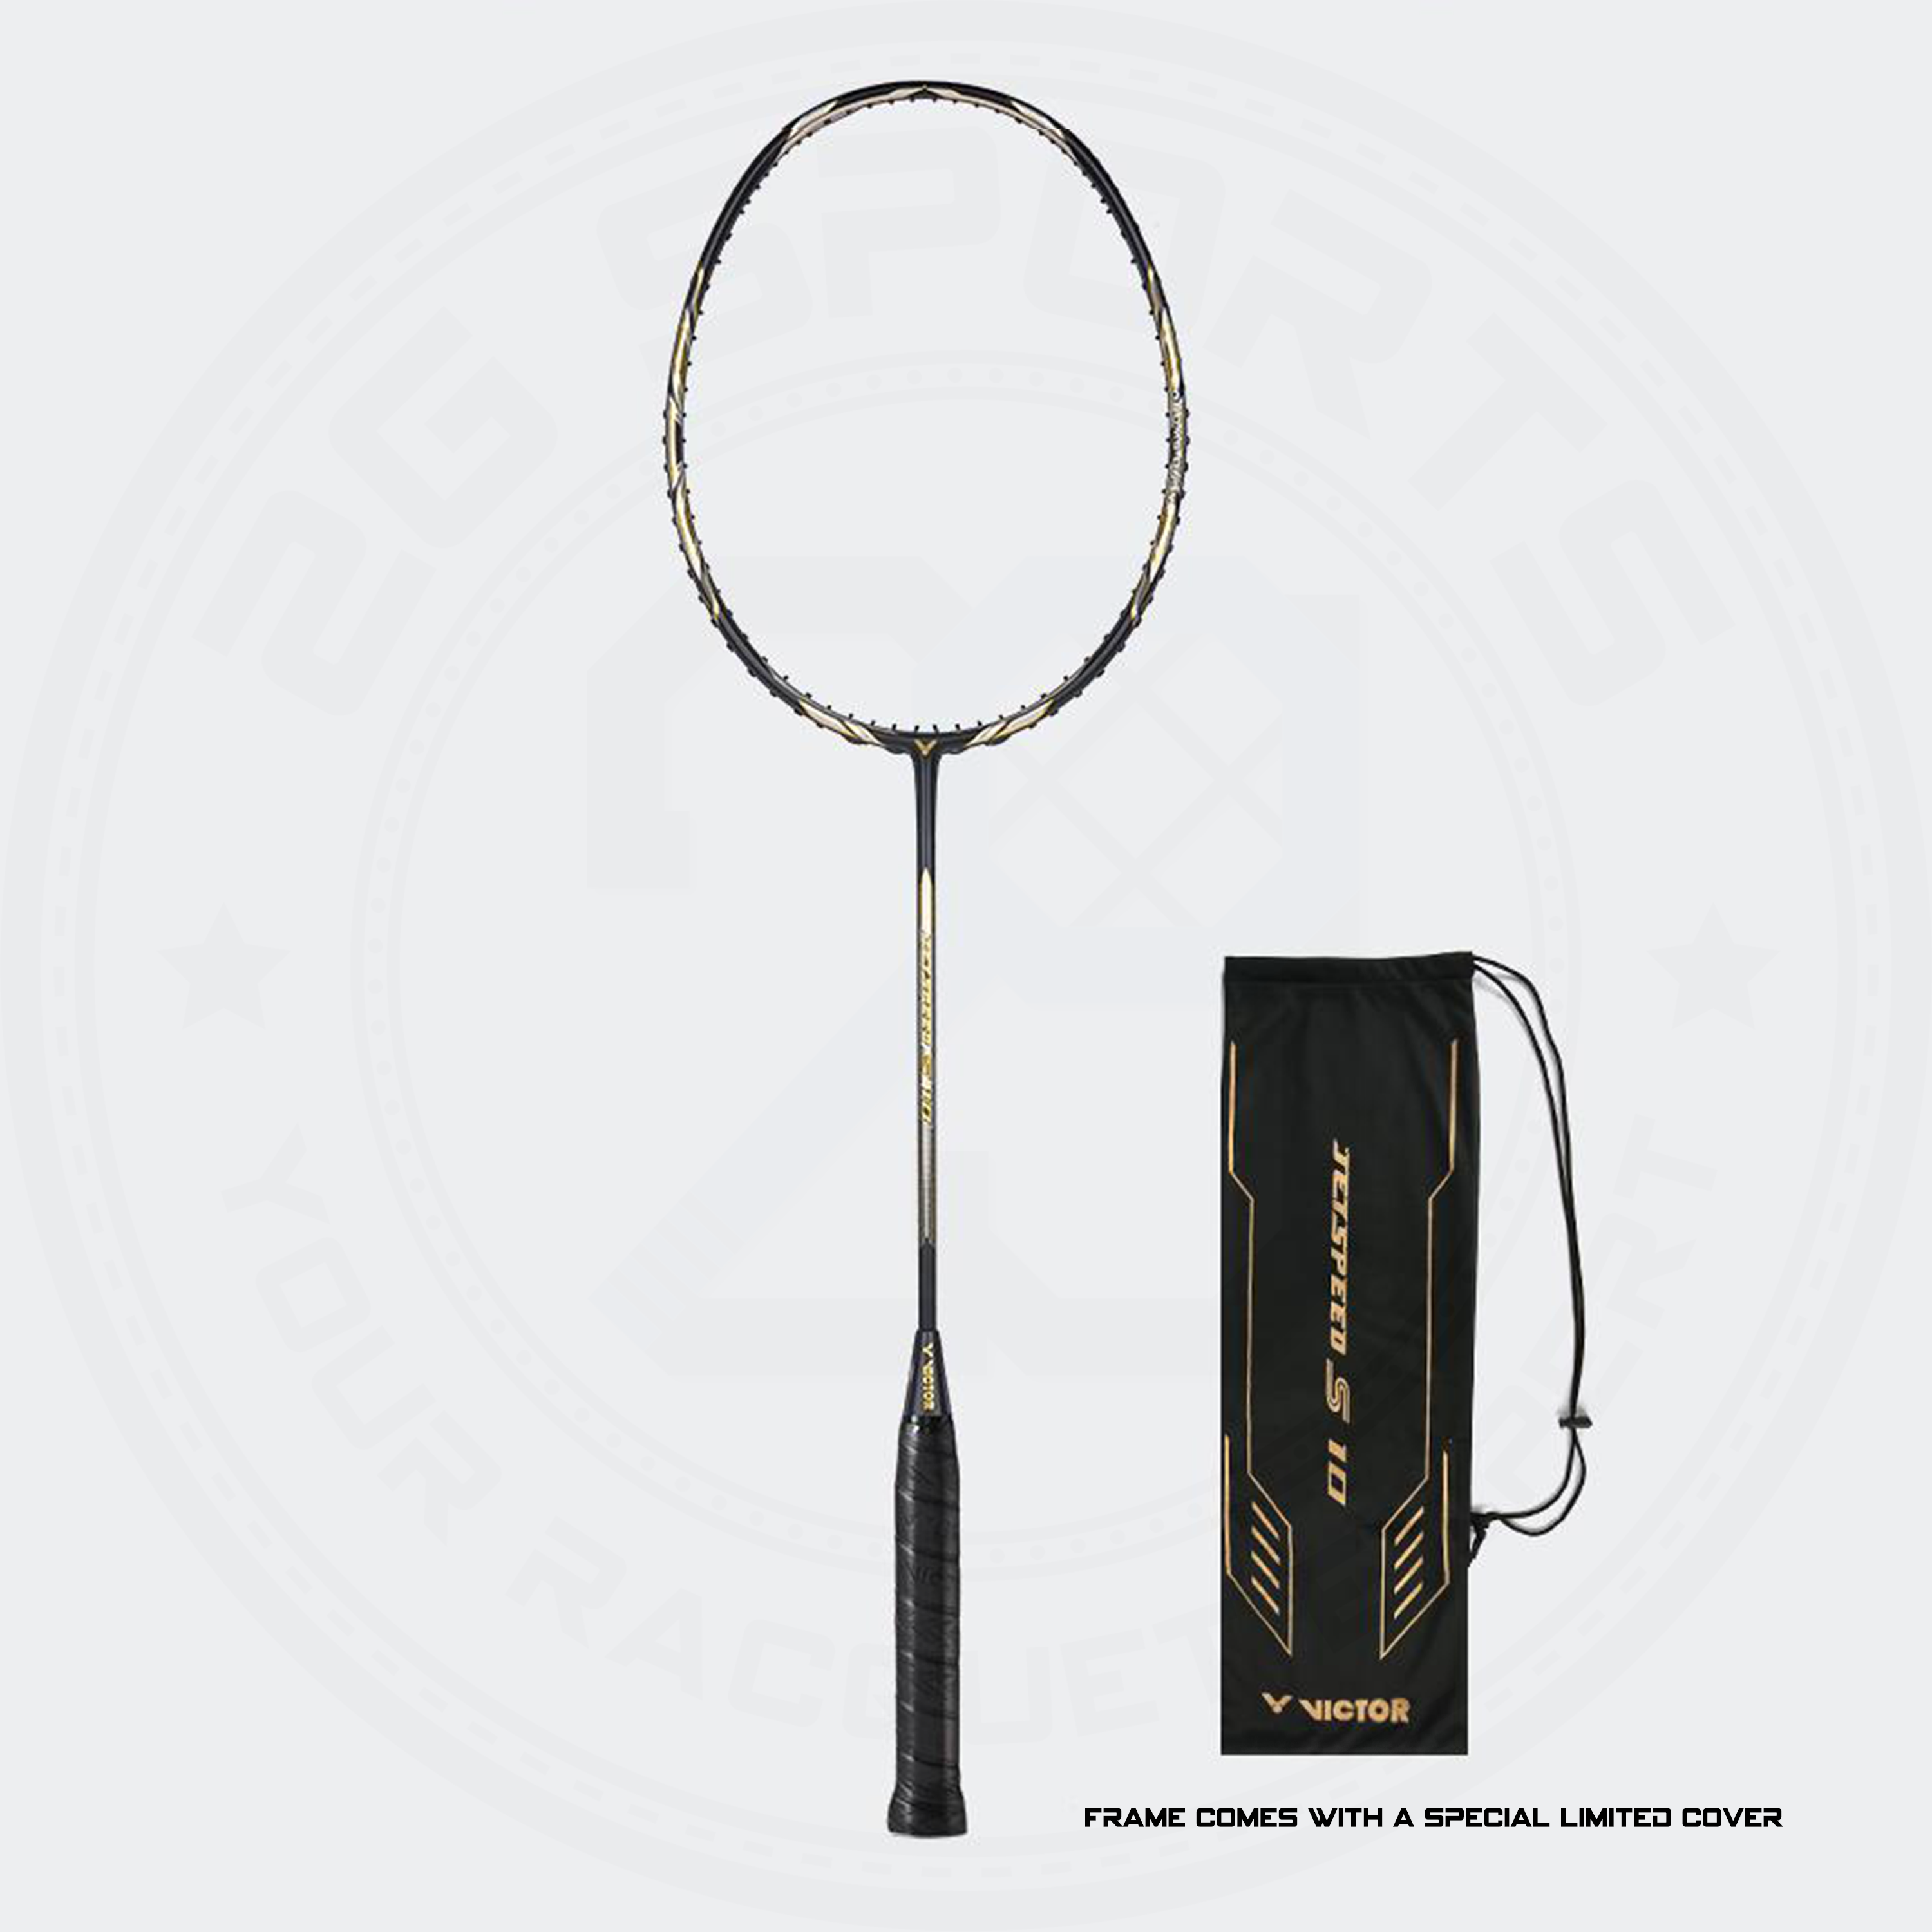 Victor Jetspeed S10 Badminton Racquet Black/ Gold Limited Edition 4U(83g)G5 (Clearance)